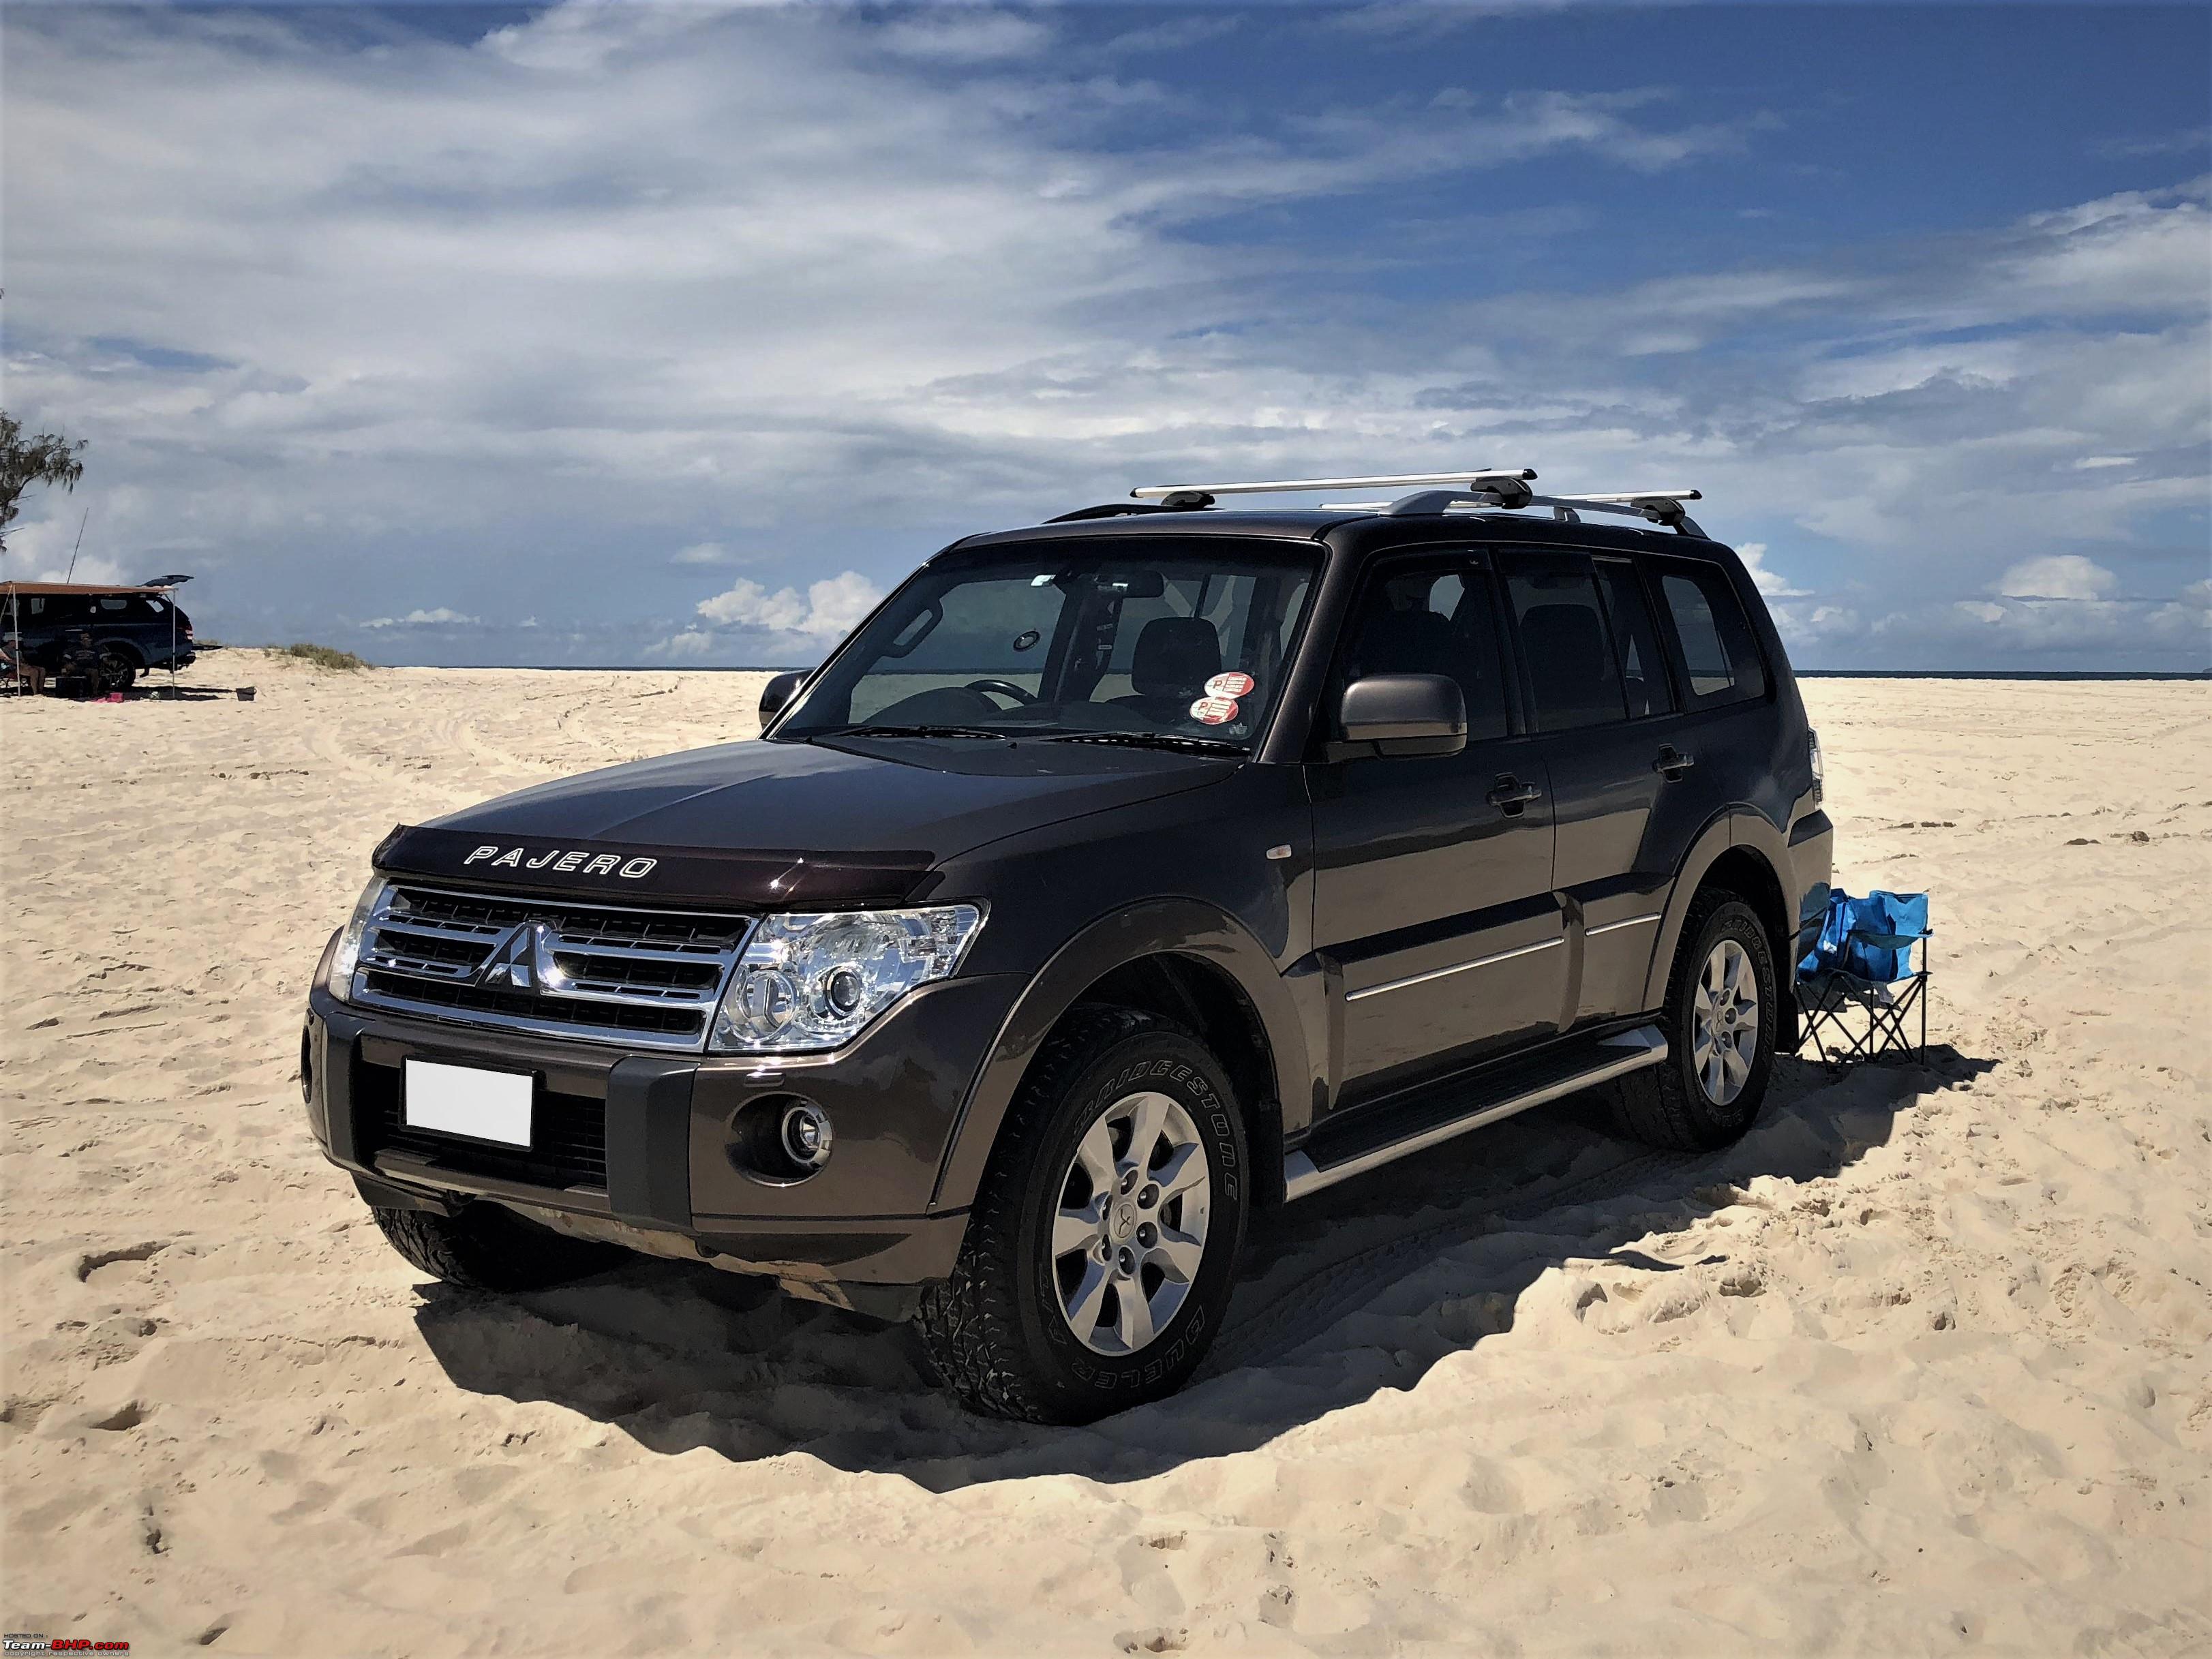 legendary mitsubishi pajero to go out of production in